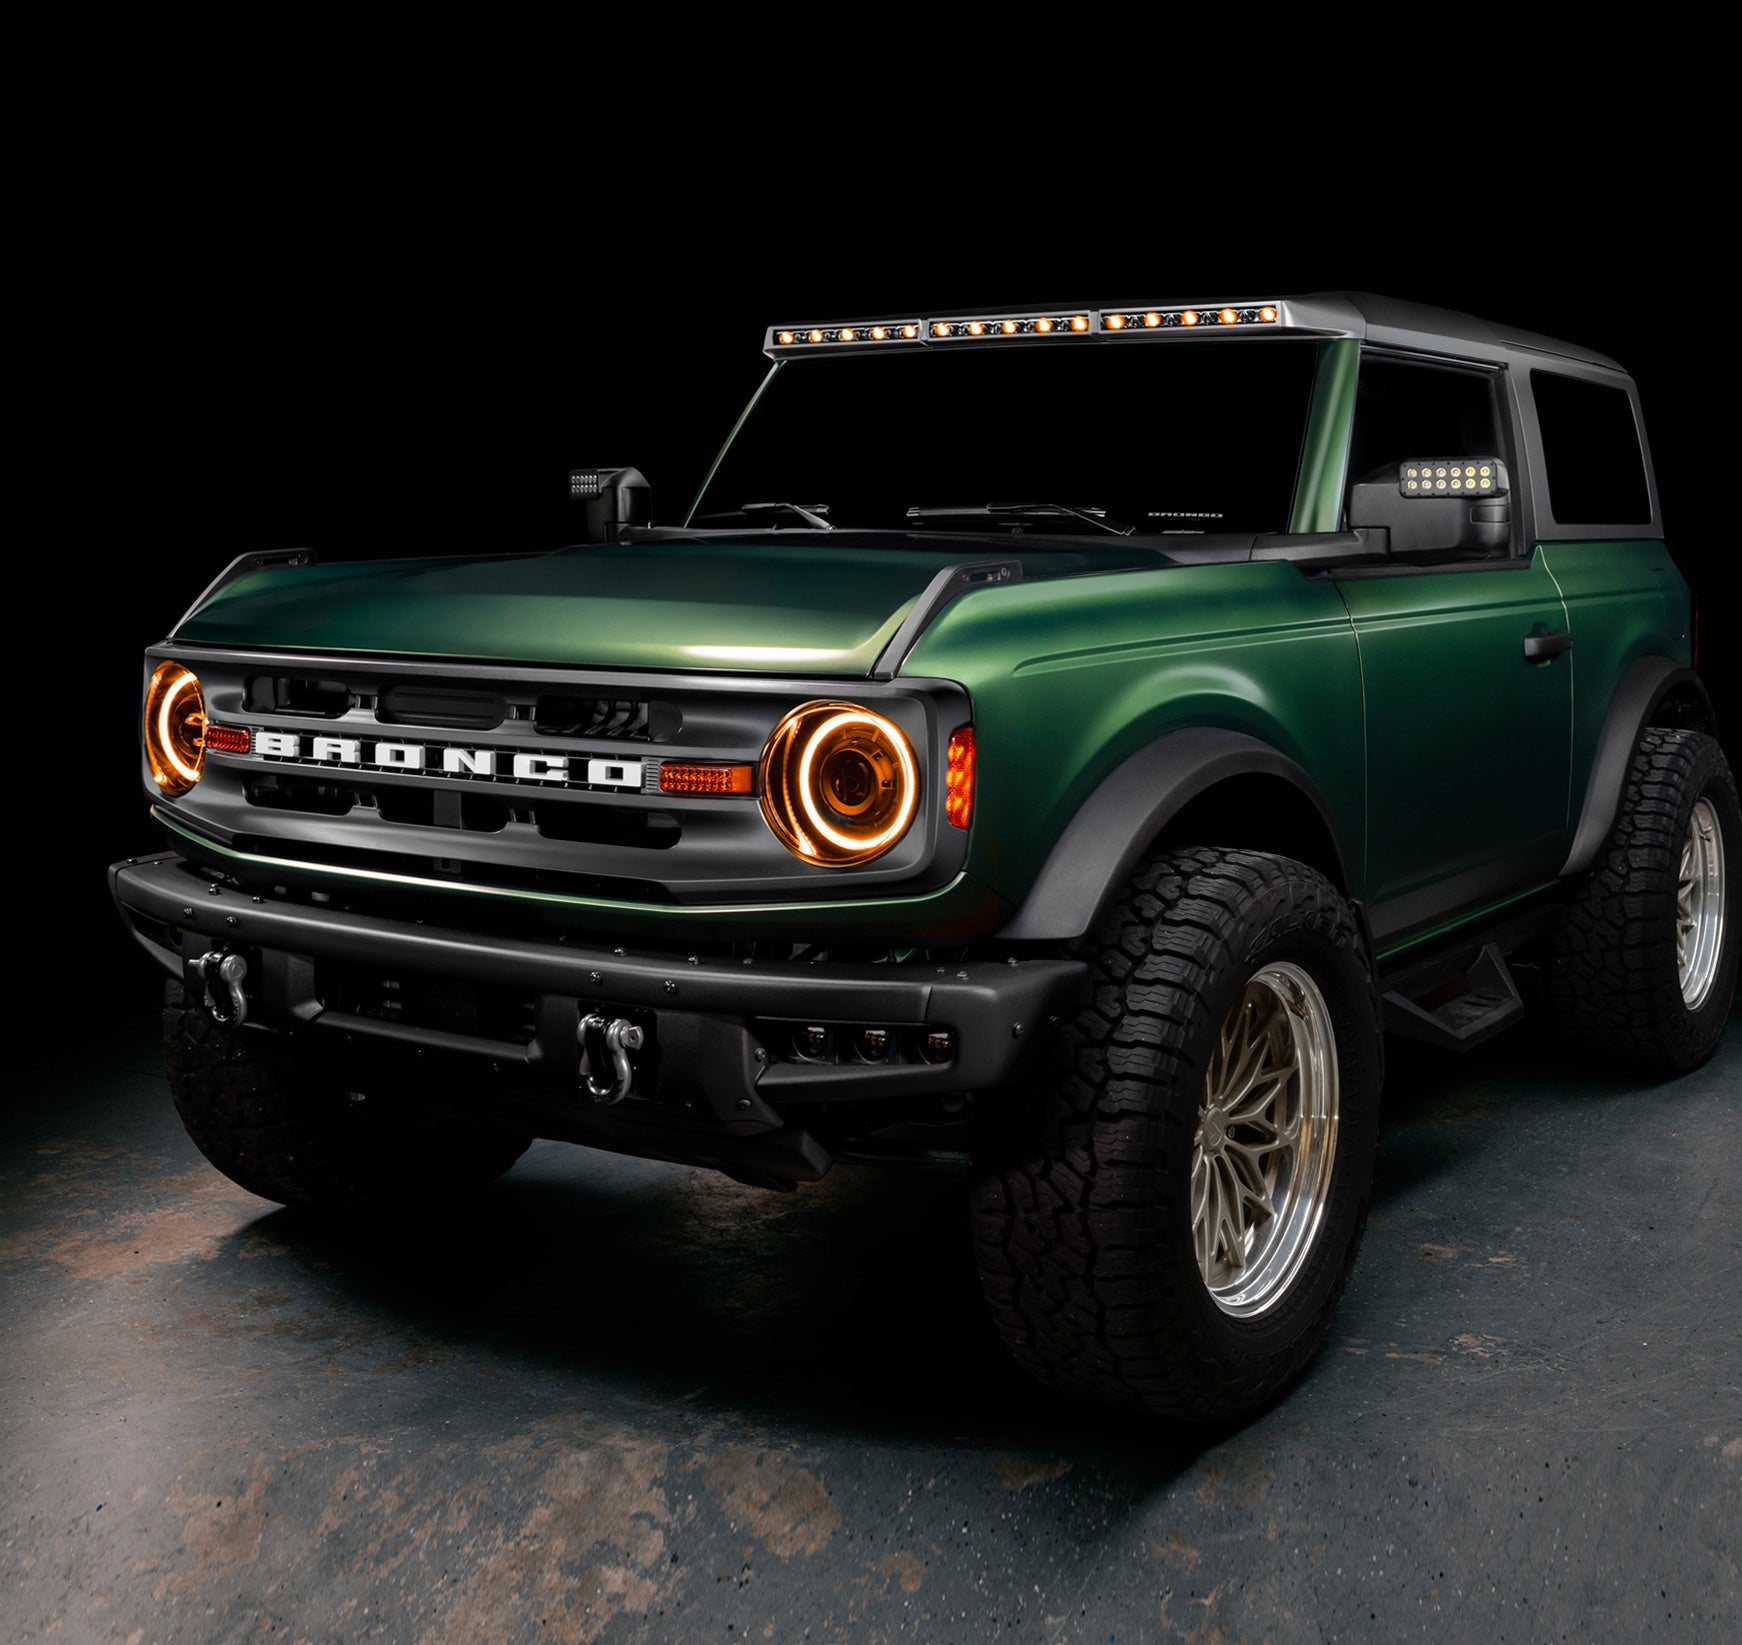 NEW from ORACLE Lighting! Oculus Bi-LED Headlights for 2021+ Ford Bronco